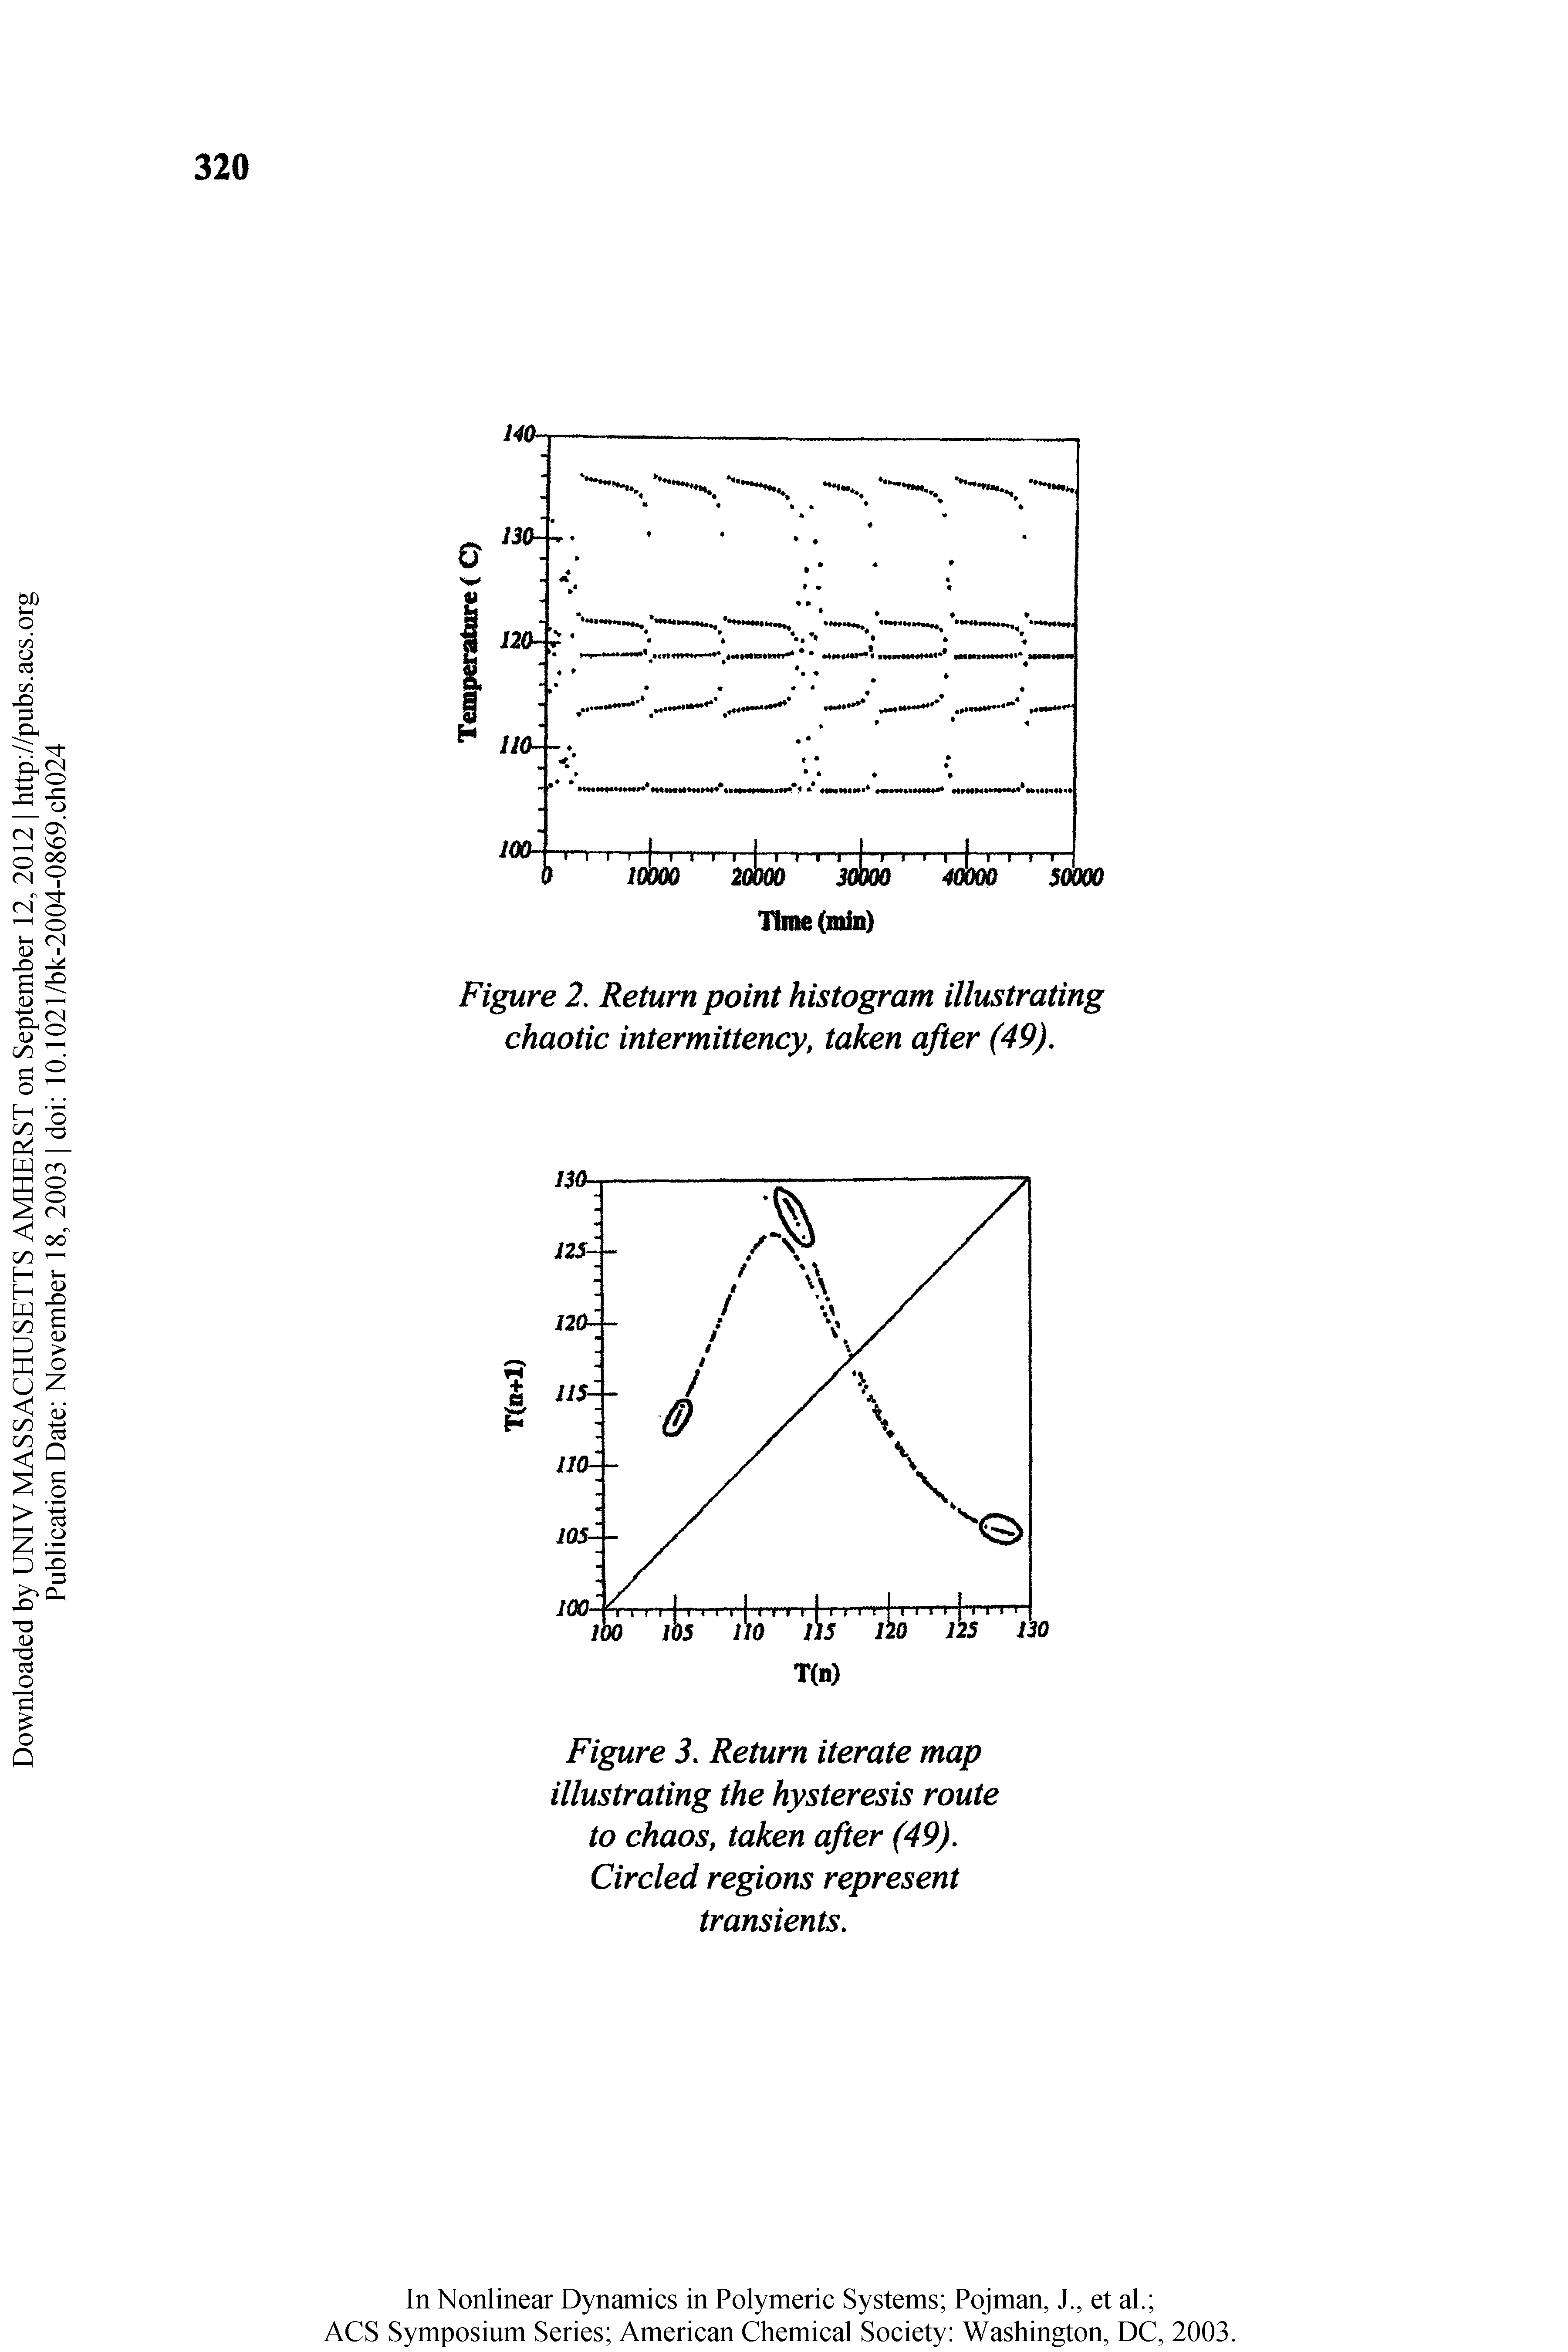 Figure 3. Return iterate map illustrating the hysteresis route to chaos, taken after (49). Circled regions represent transients.